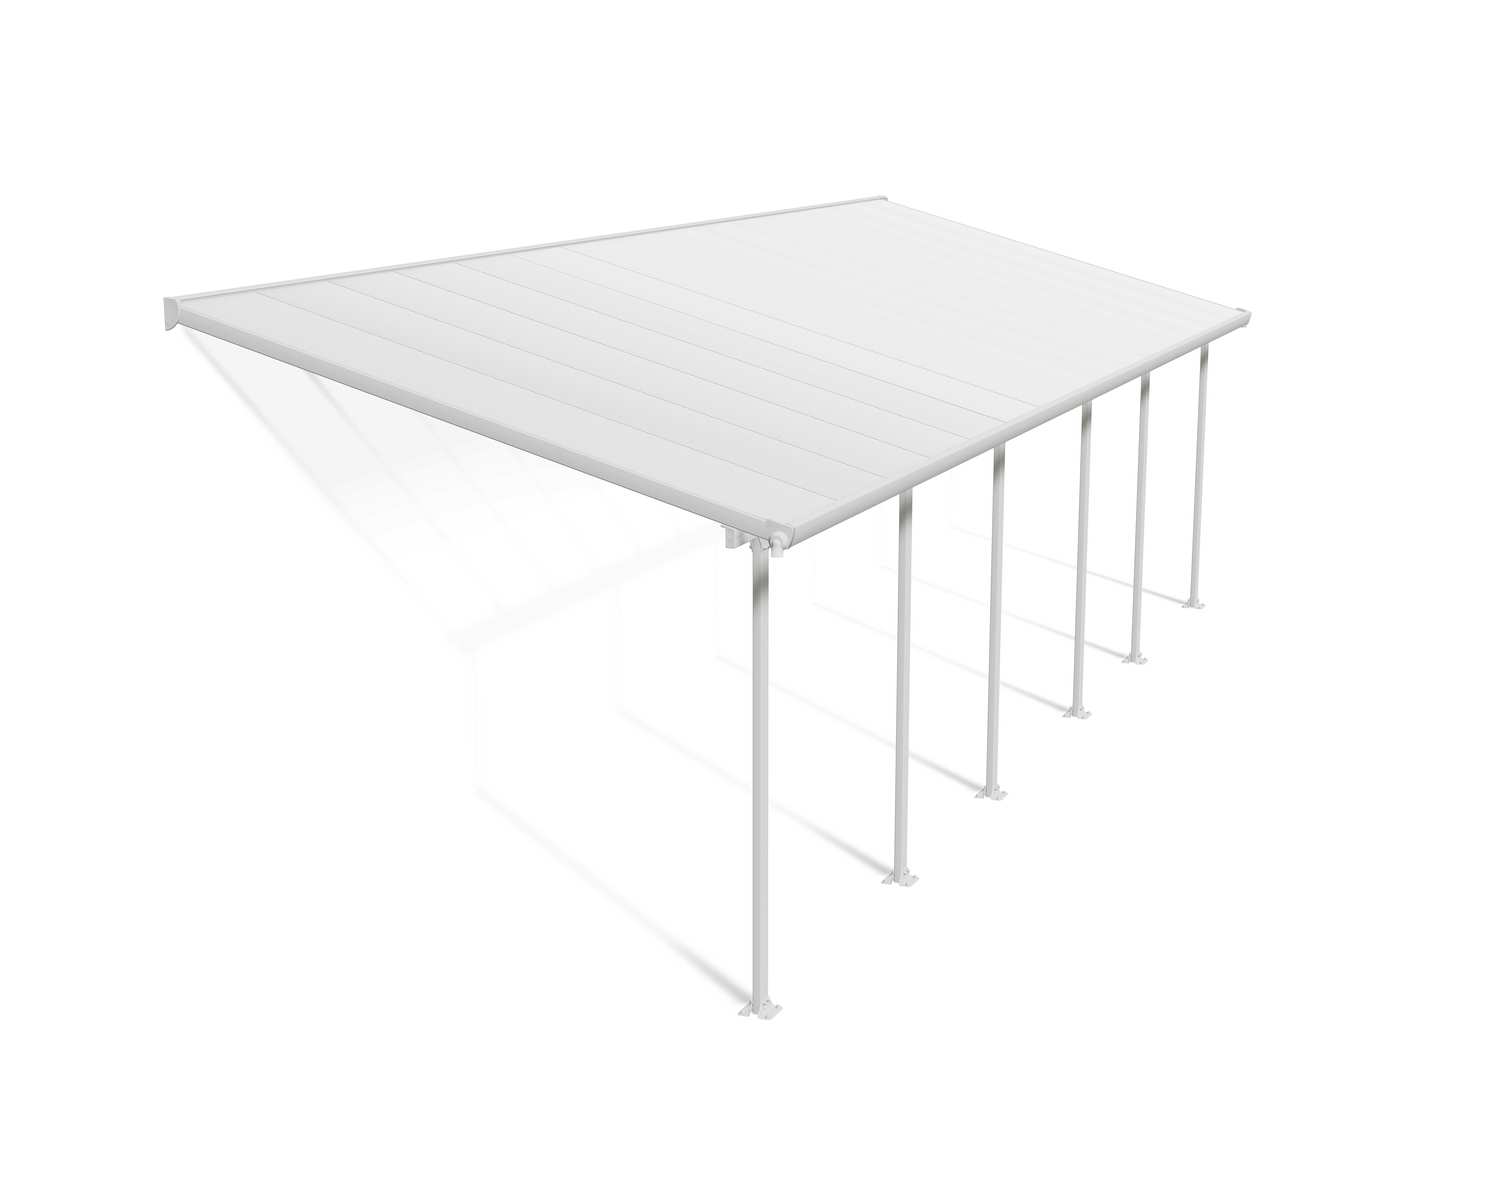 Feria 10 ft. x 30 ft. White Aluminium Patio Cover With 6 Posts, White Twin-Wall Polycarbonate Roof Panels.